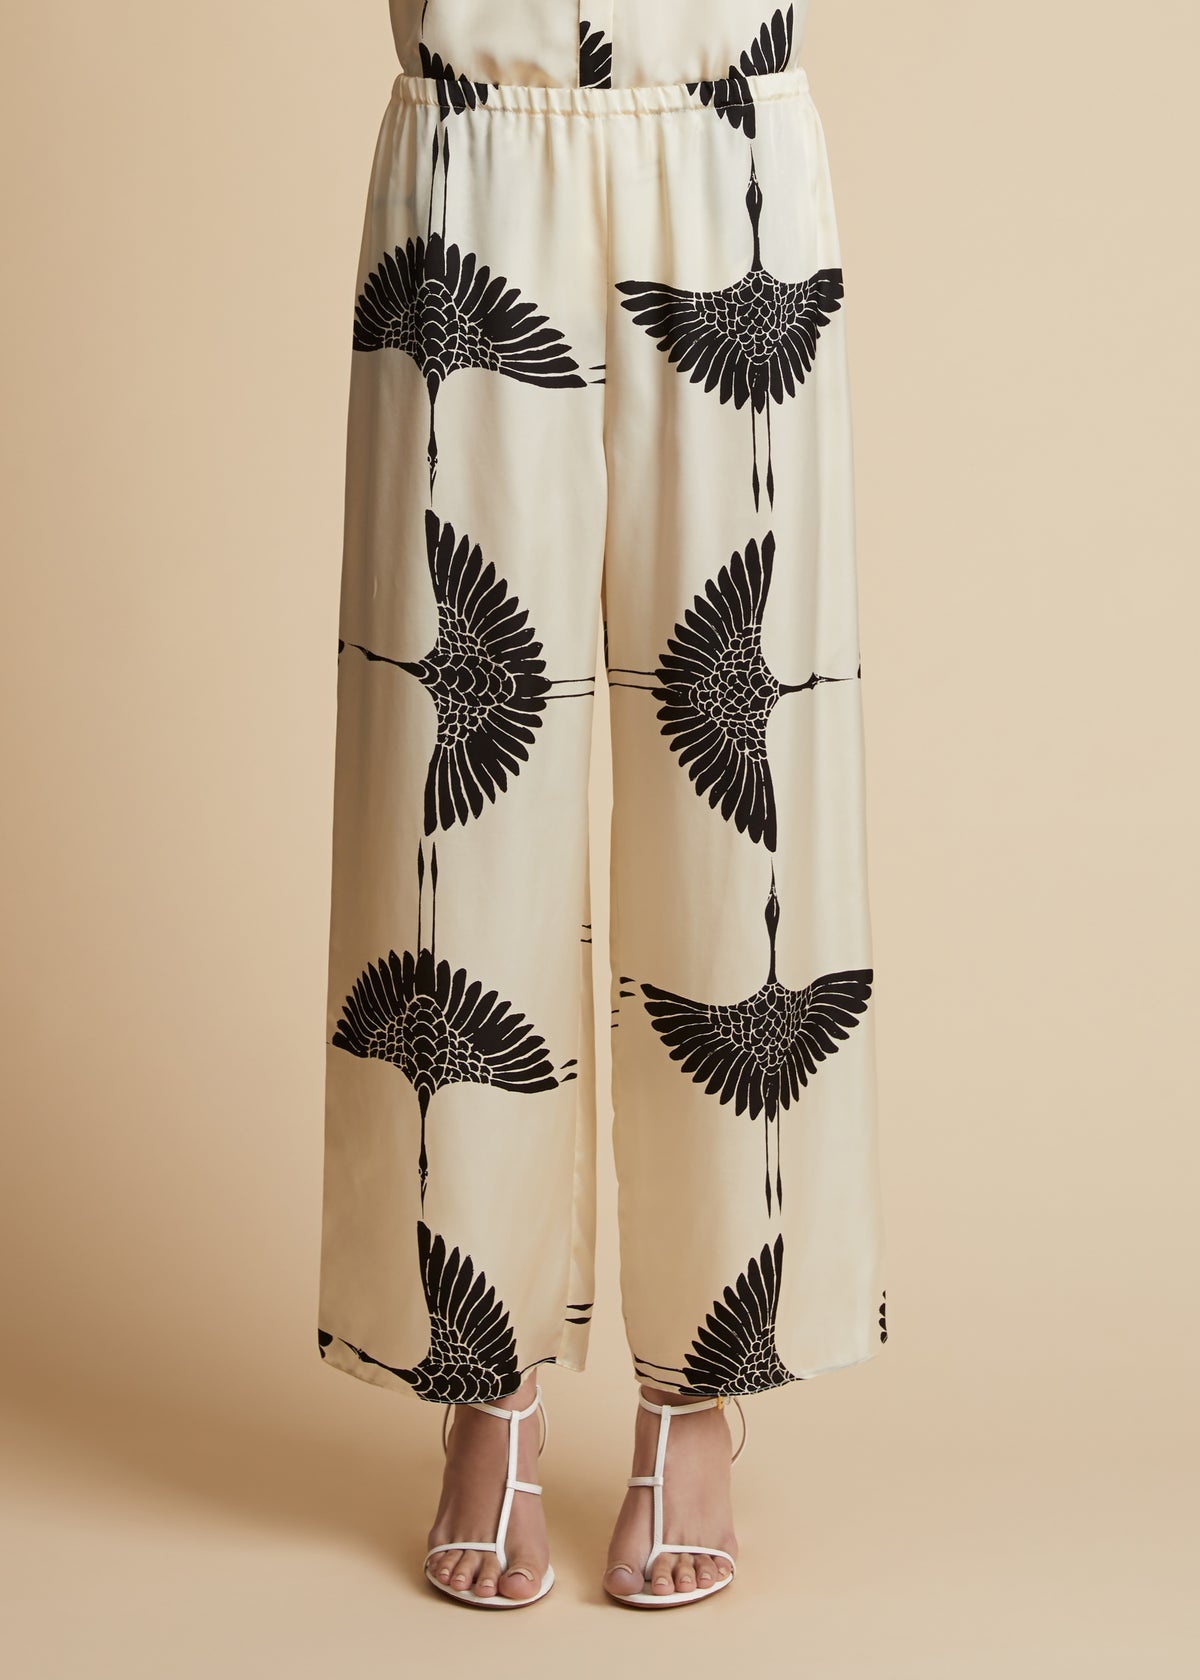 The Mindy Pant in Cream and Black Crane Print - 1